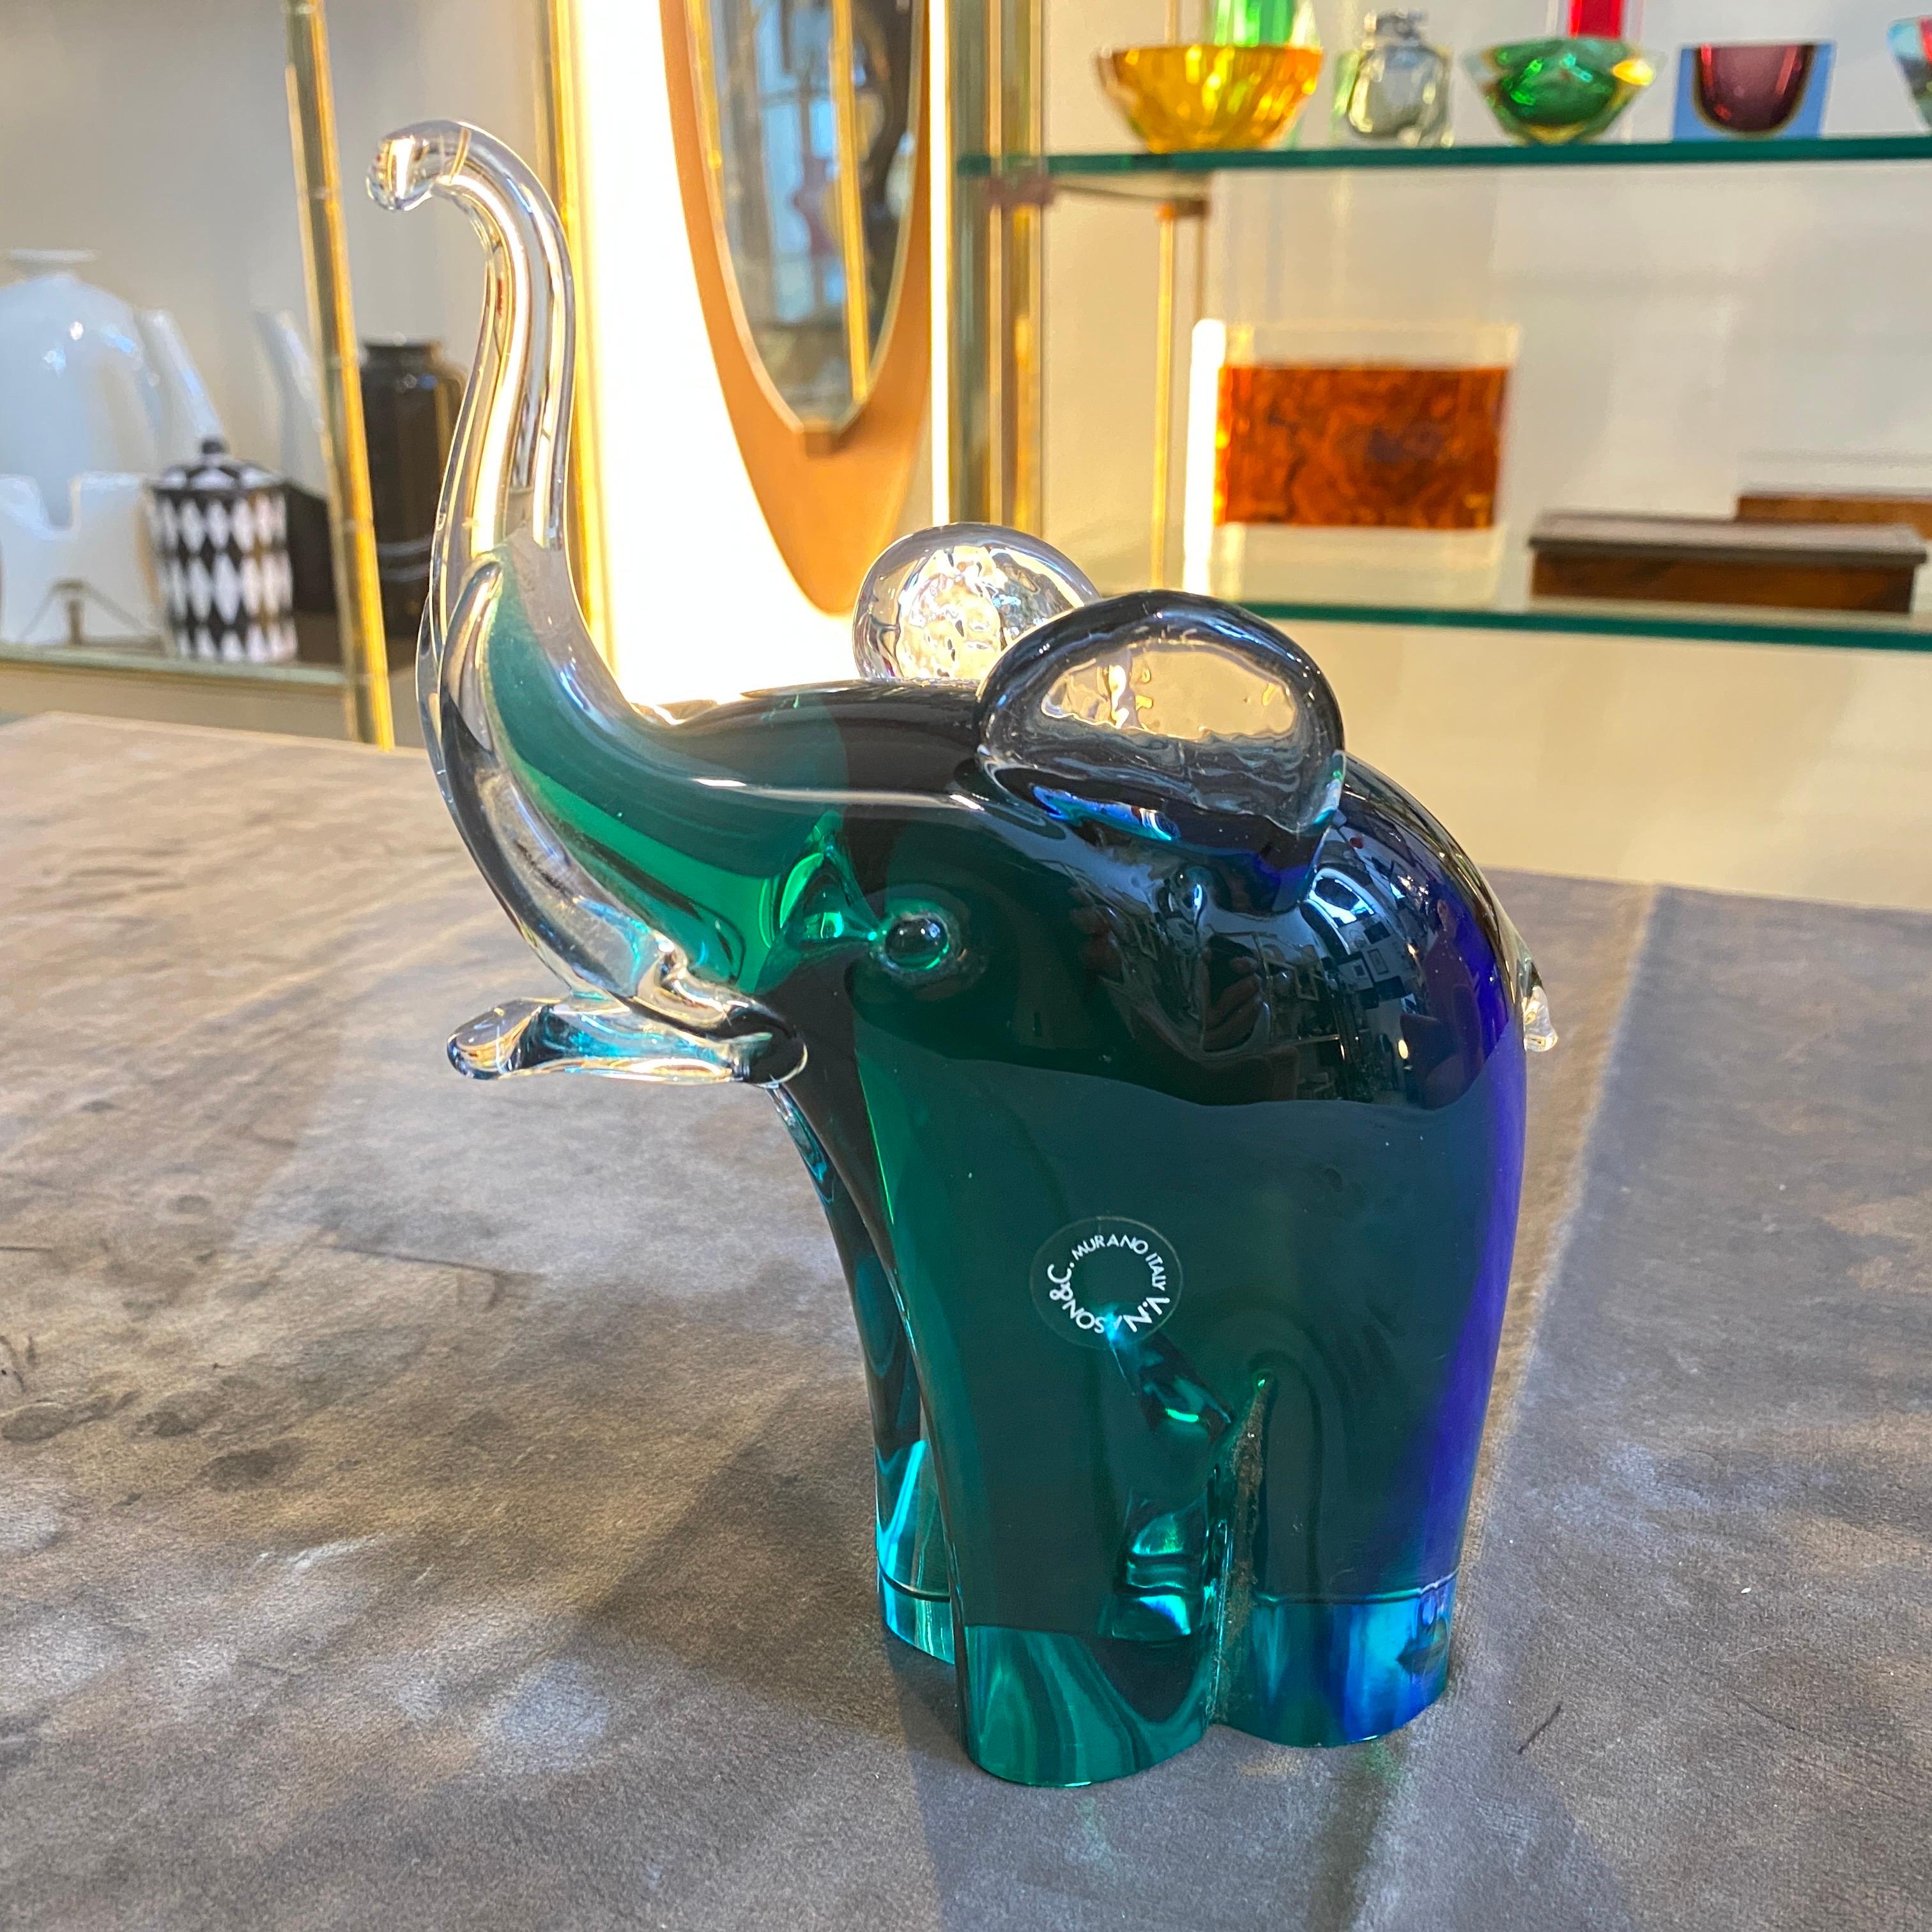 The murano glass elephant it's labeled on a side and it's in perfect conditions. The blue and green Sommerso Murano glass elephant designed and manufactured by Vincenzo Nason is a stunning piece of art that exemplifies the artistry and craftsmanship